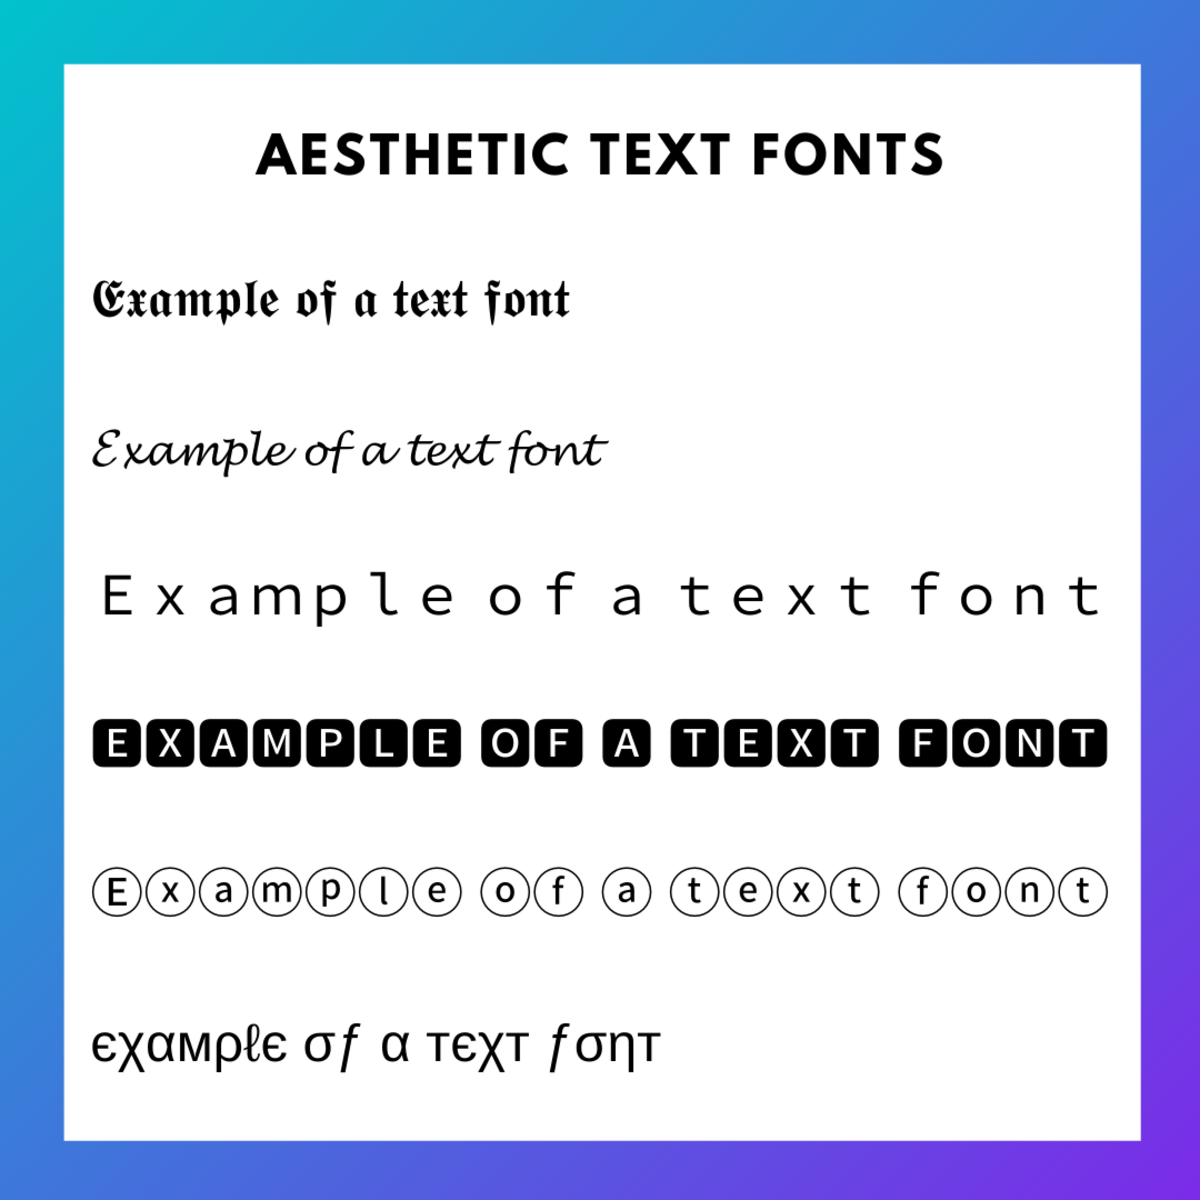 Some examples of aesthetic text fonts which could be used for Discord channel names.